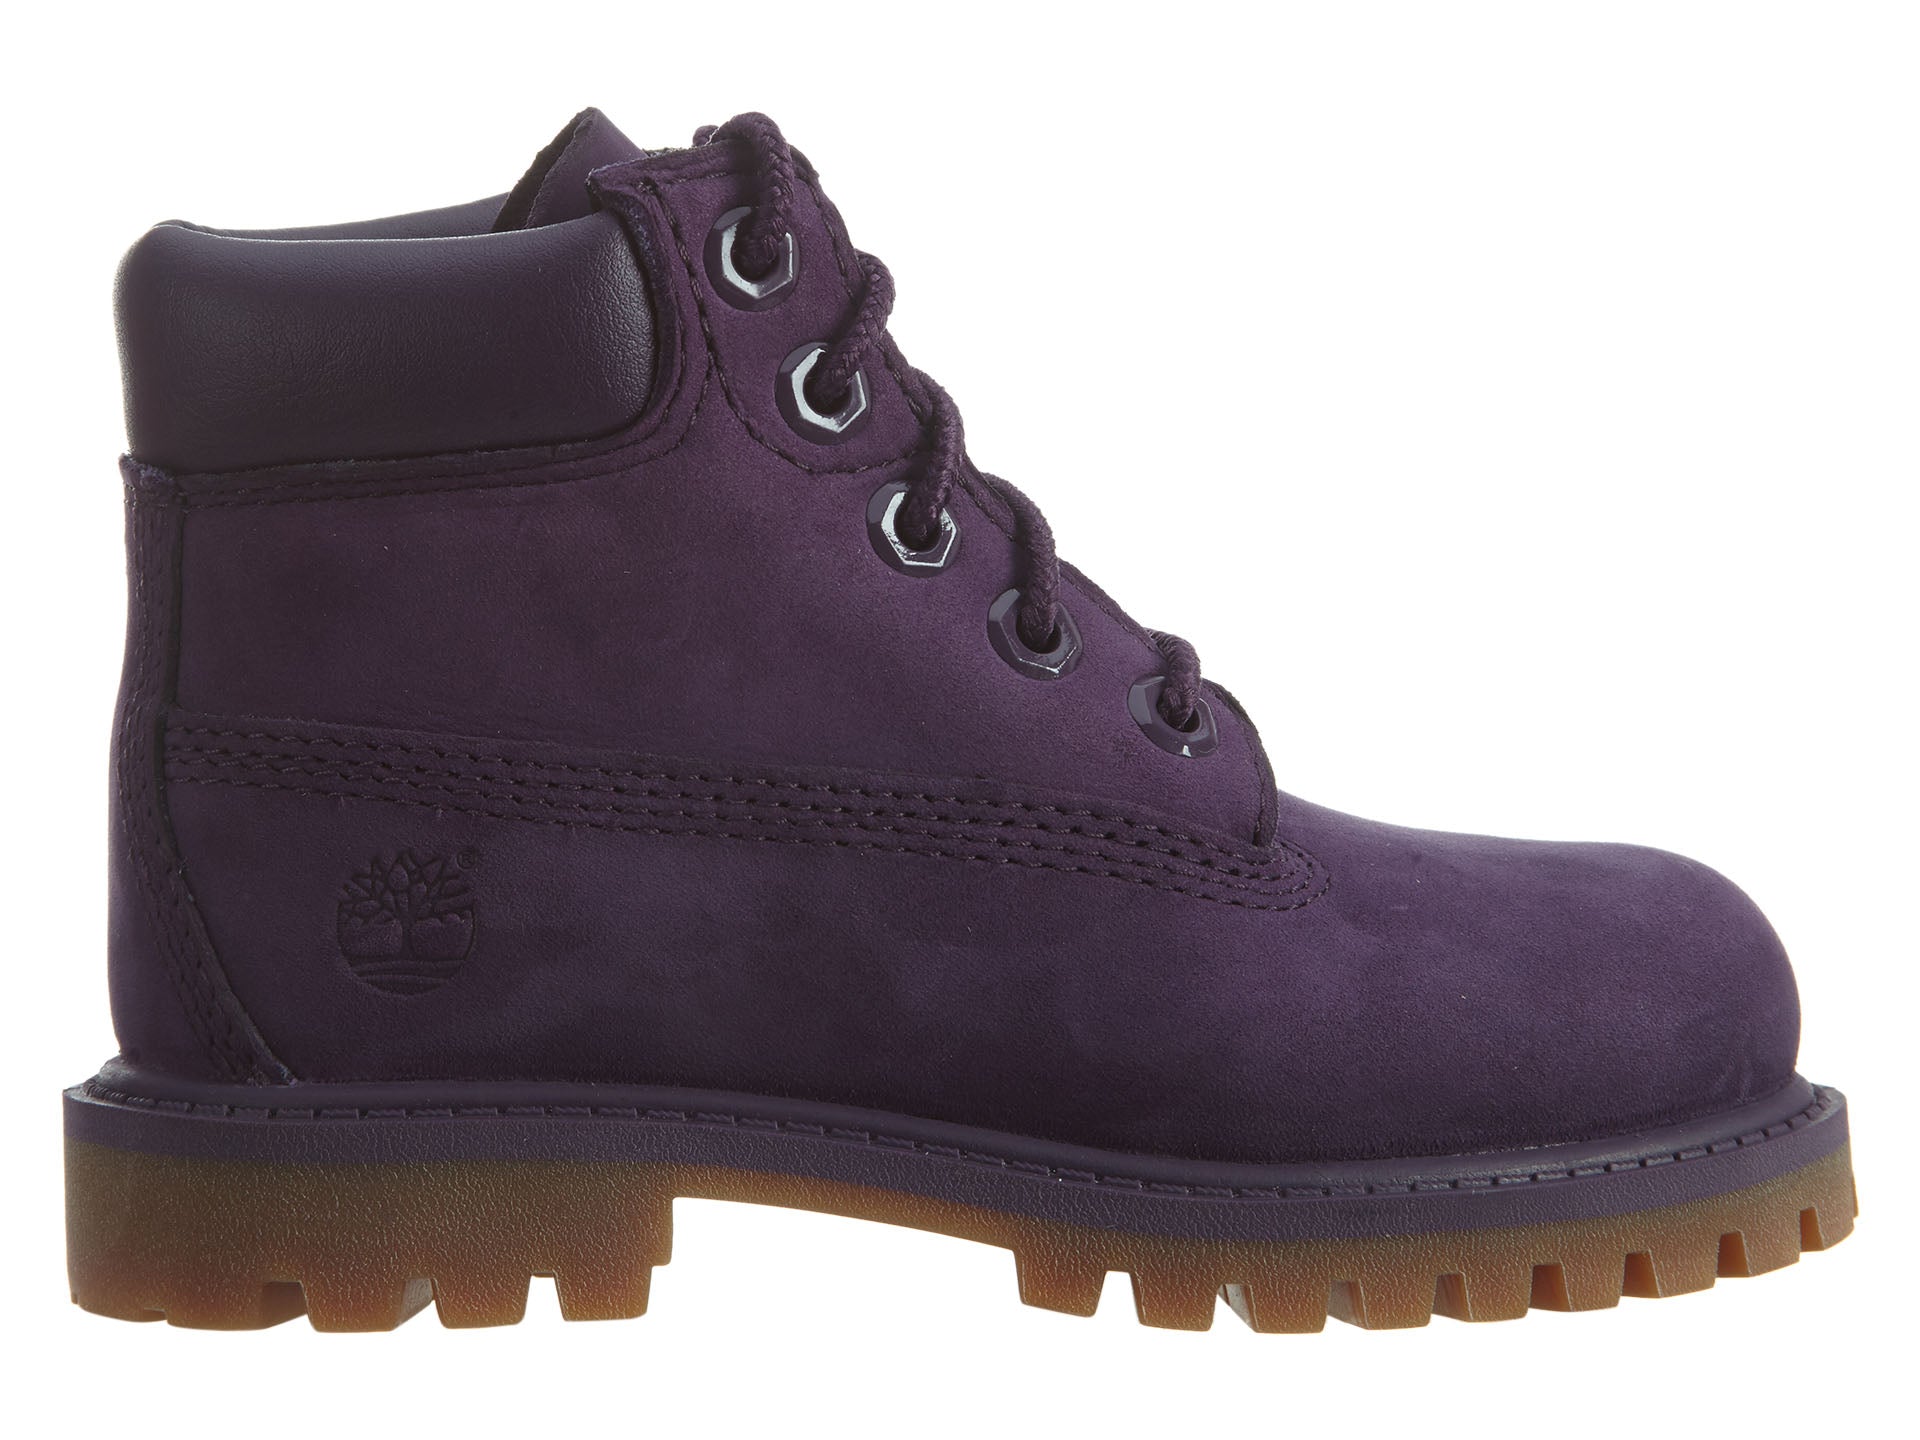 Timberland 6 Premium Waterproof Boot Toddlers Style : Tb0a14vl